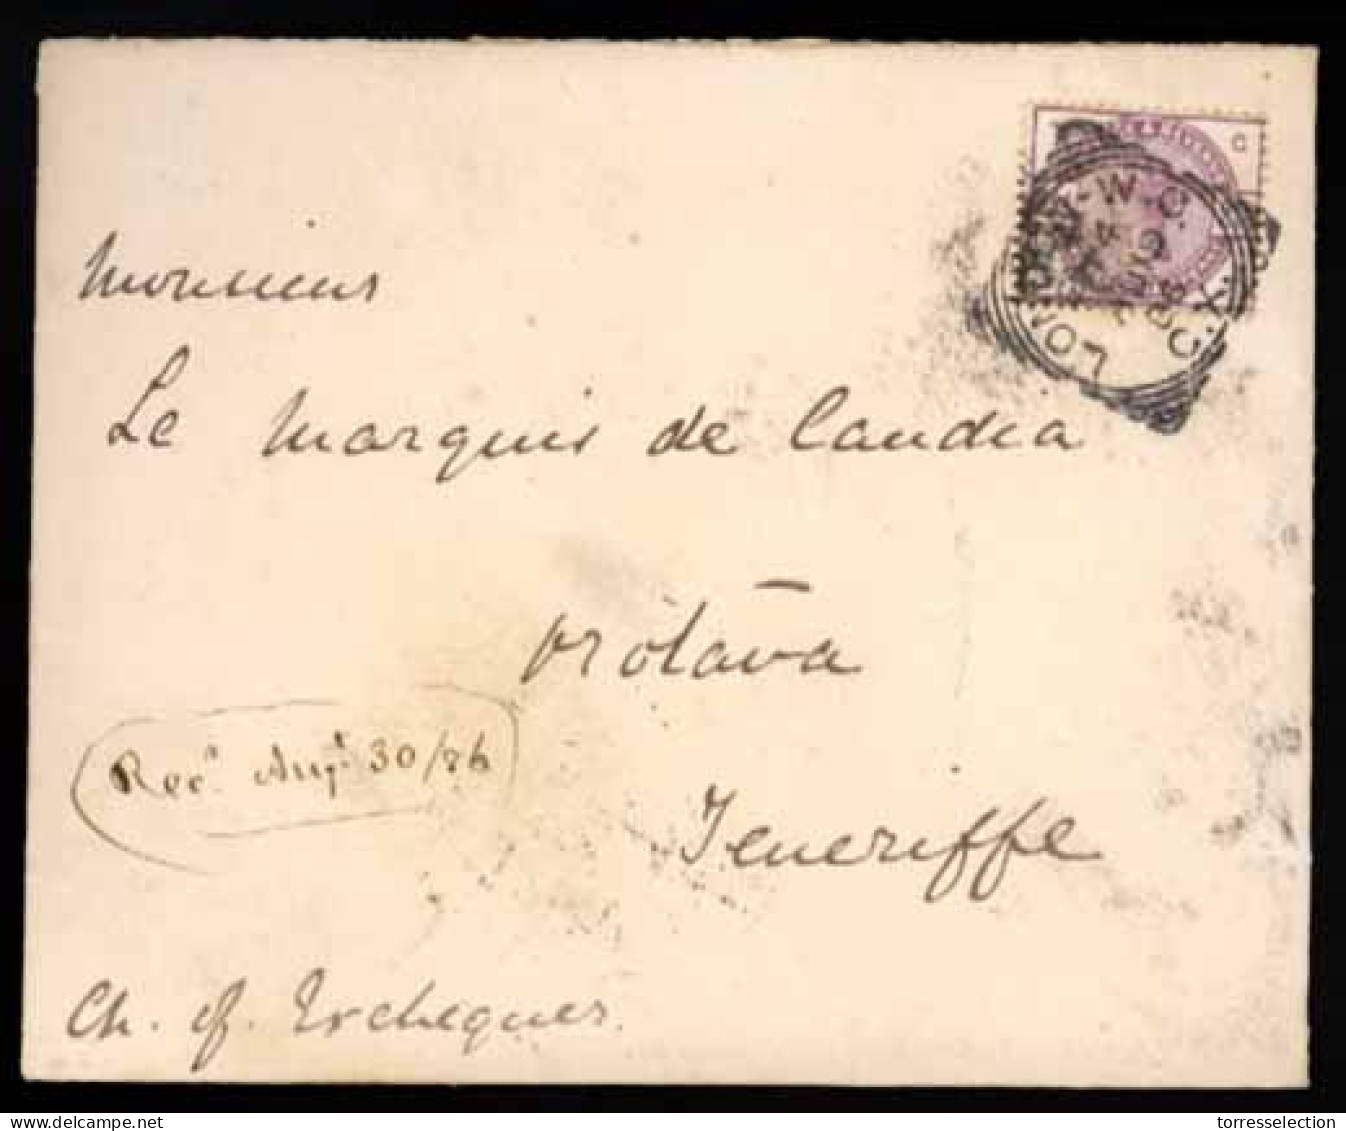 GREAT BRITAIN. 1886, London To Canary Islands/Spain. 2 1/2d.frkd.env.F. - ...-1840 Voorlopers